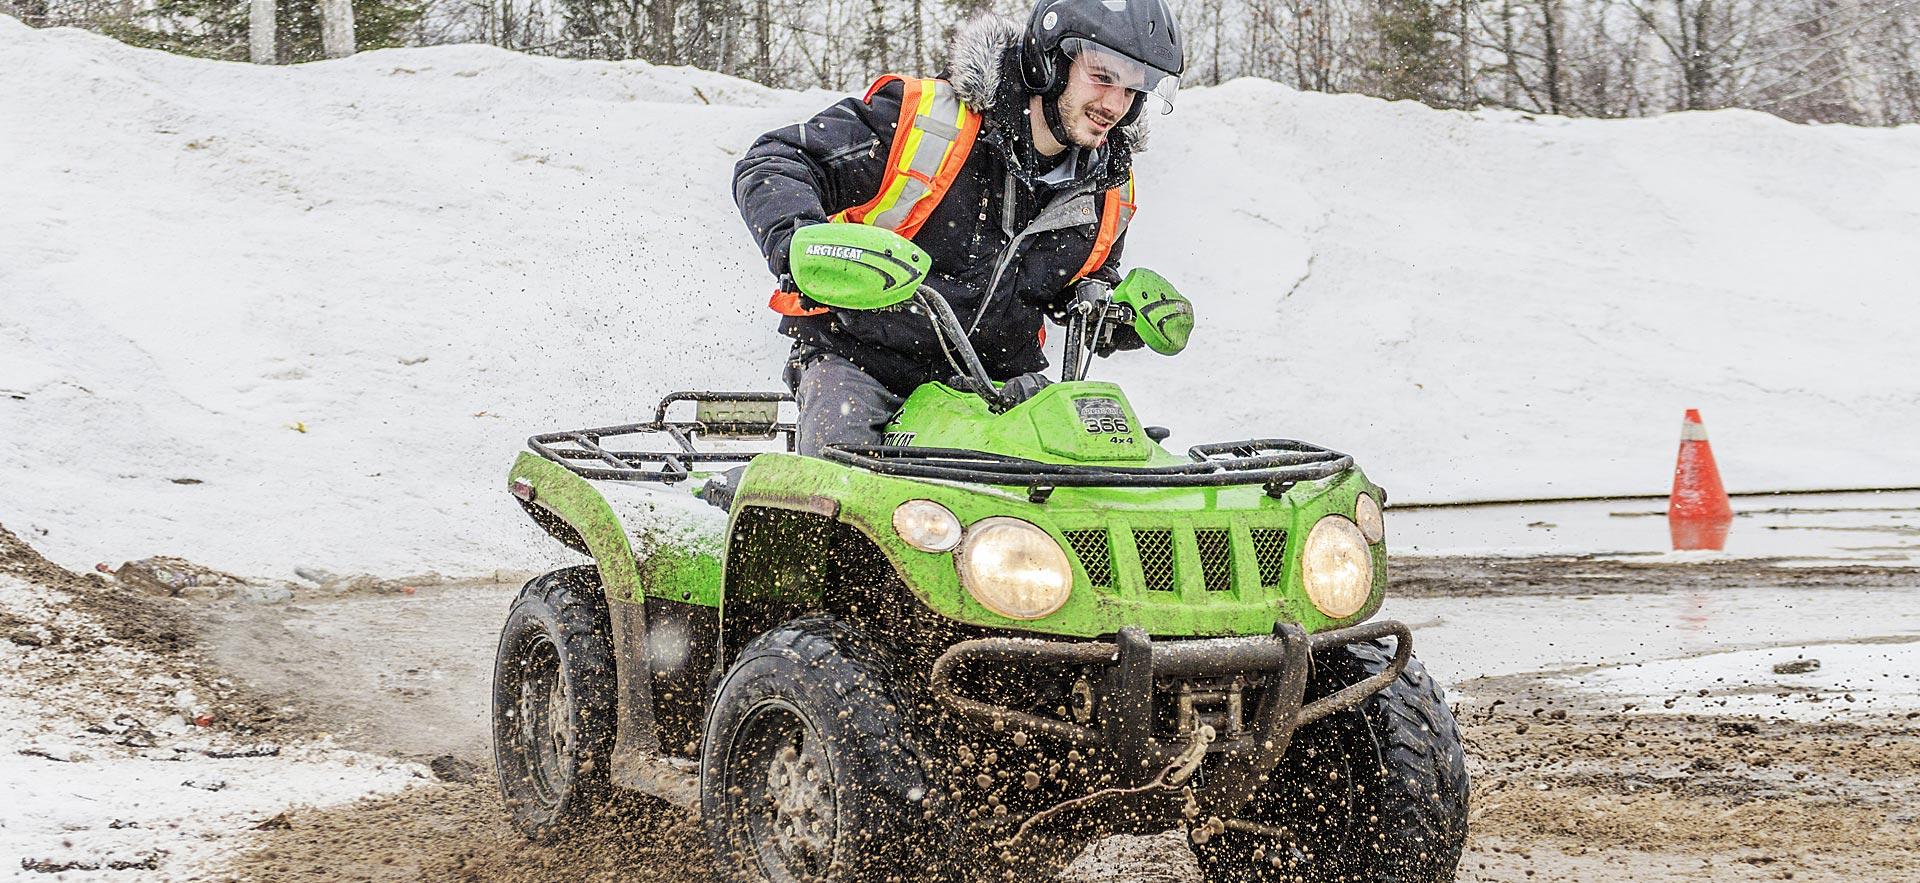 Male student rides an all terrain vehicle through snow and mud.